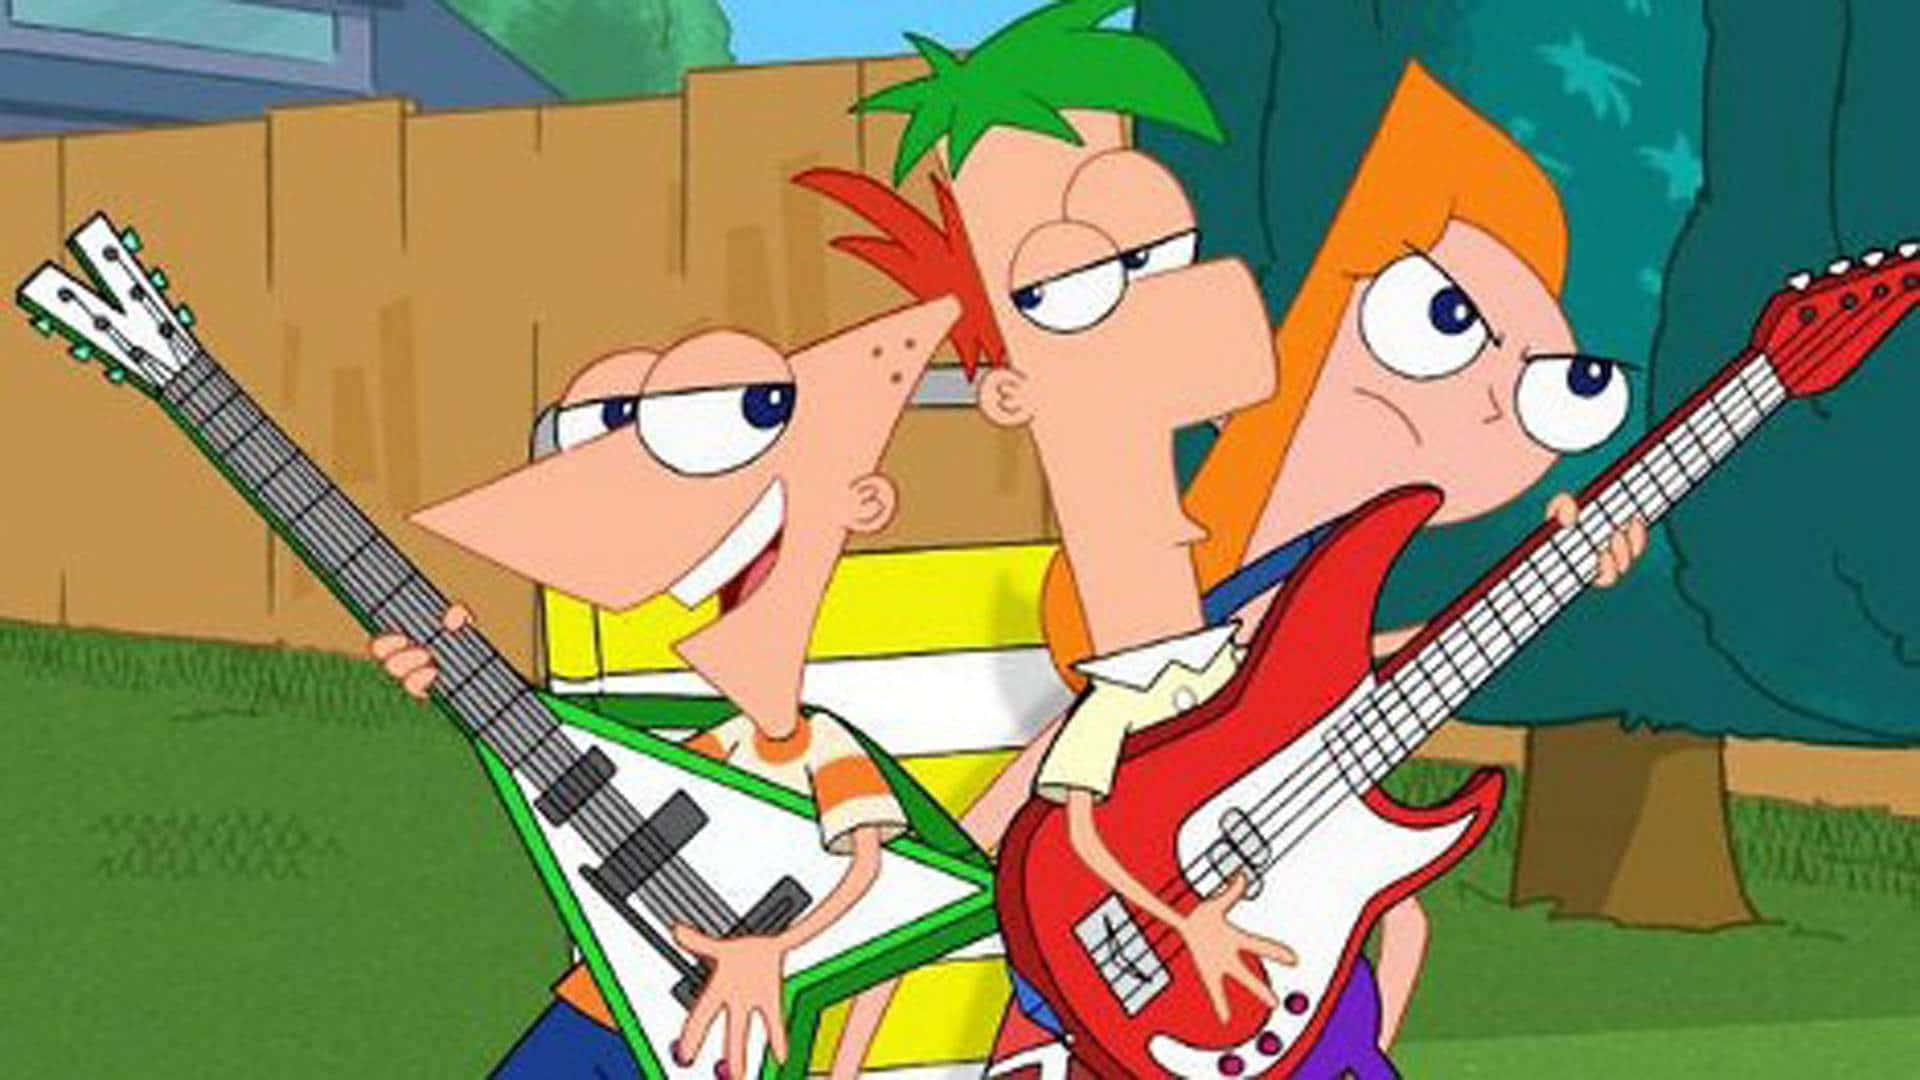 Phineas and Ferb enjoy their summer adventures together with their friends in Danville